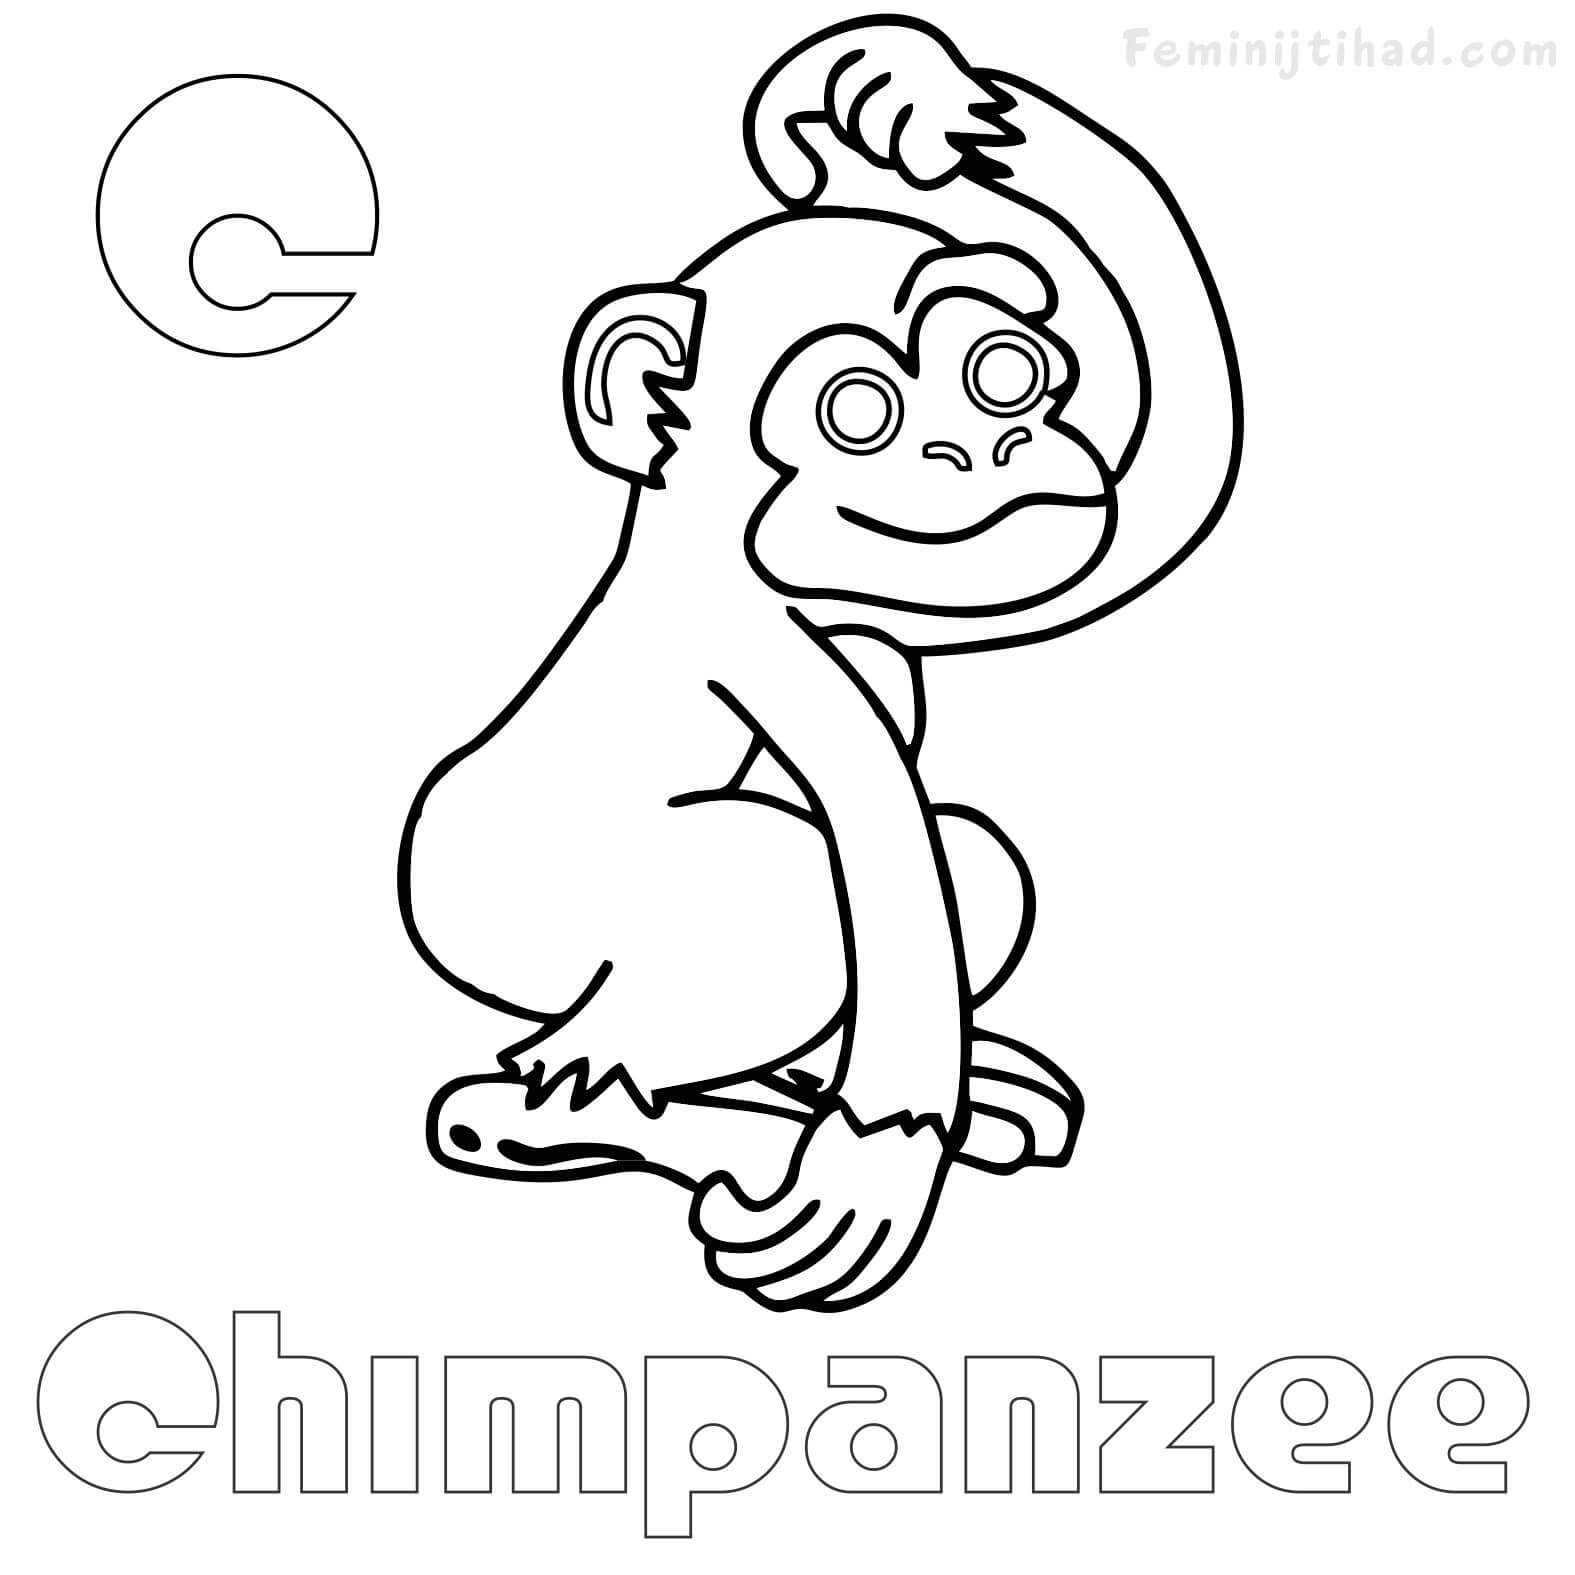 chimpanzee coloring pages free